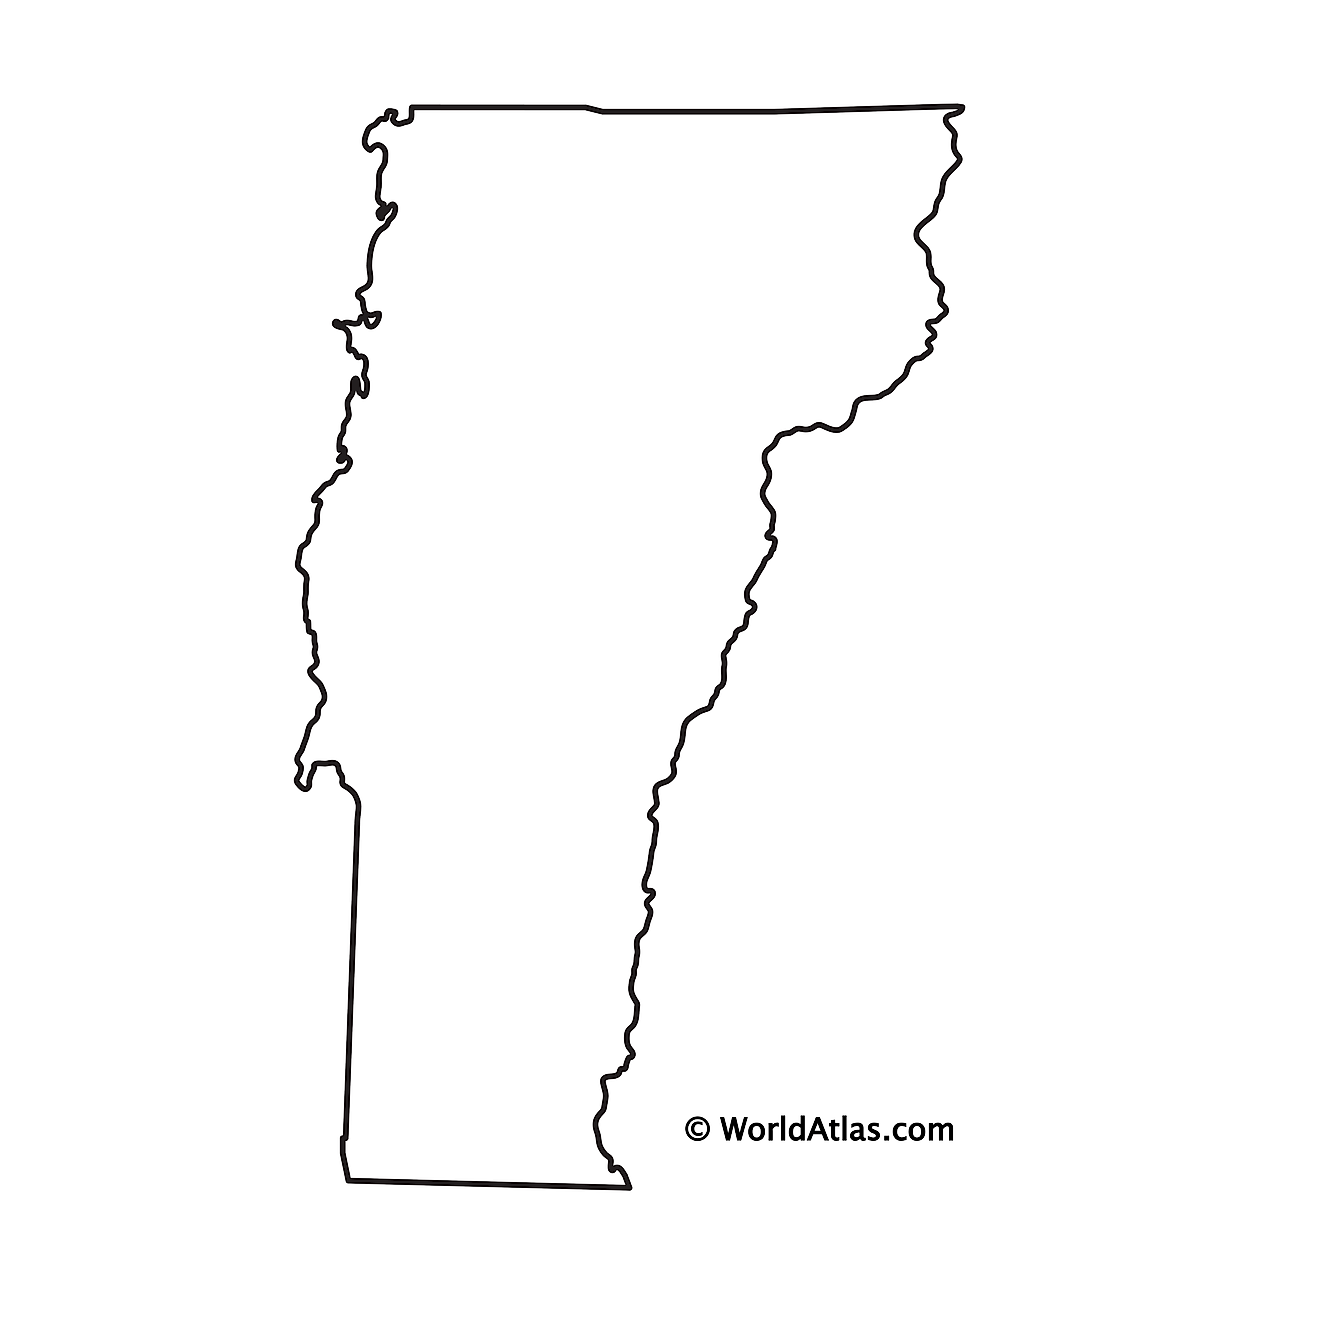 Blank Outline Map of Vermont